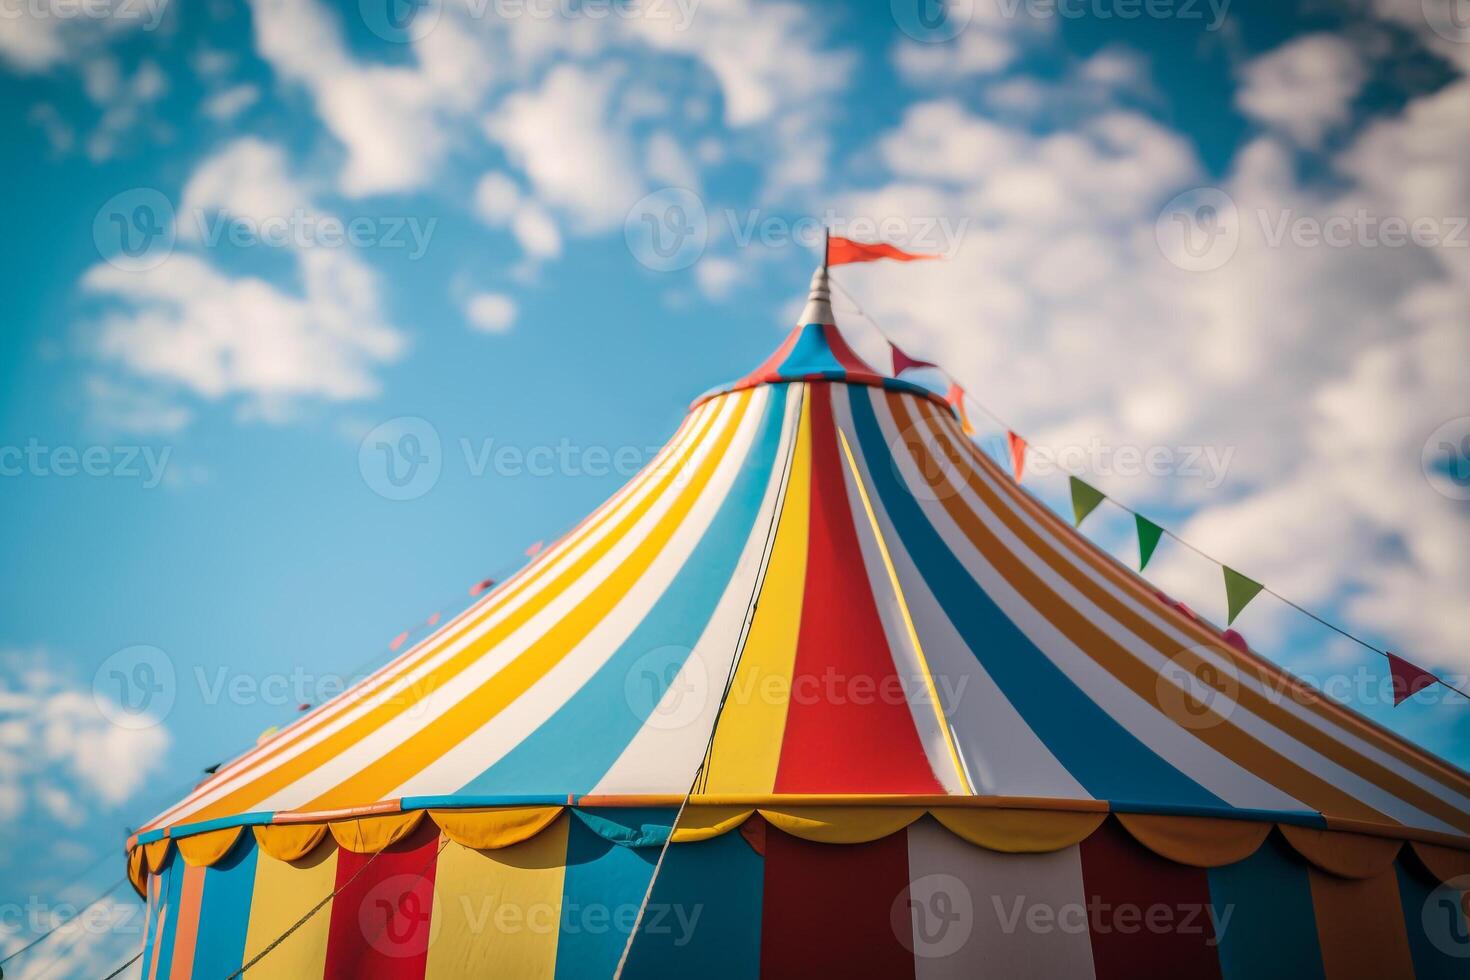 colorful circus striped tent against the background of the summer sky photo